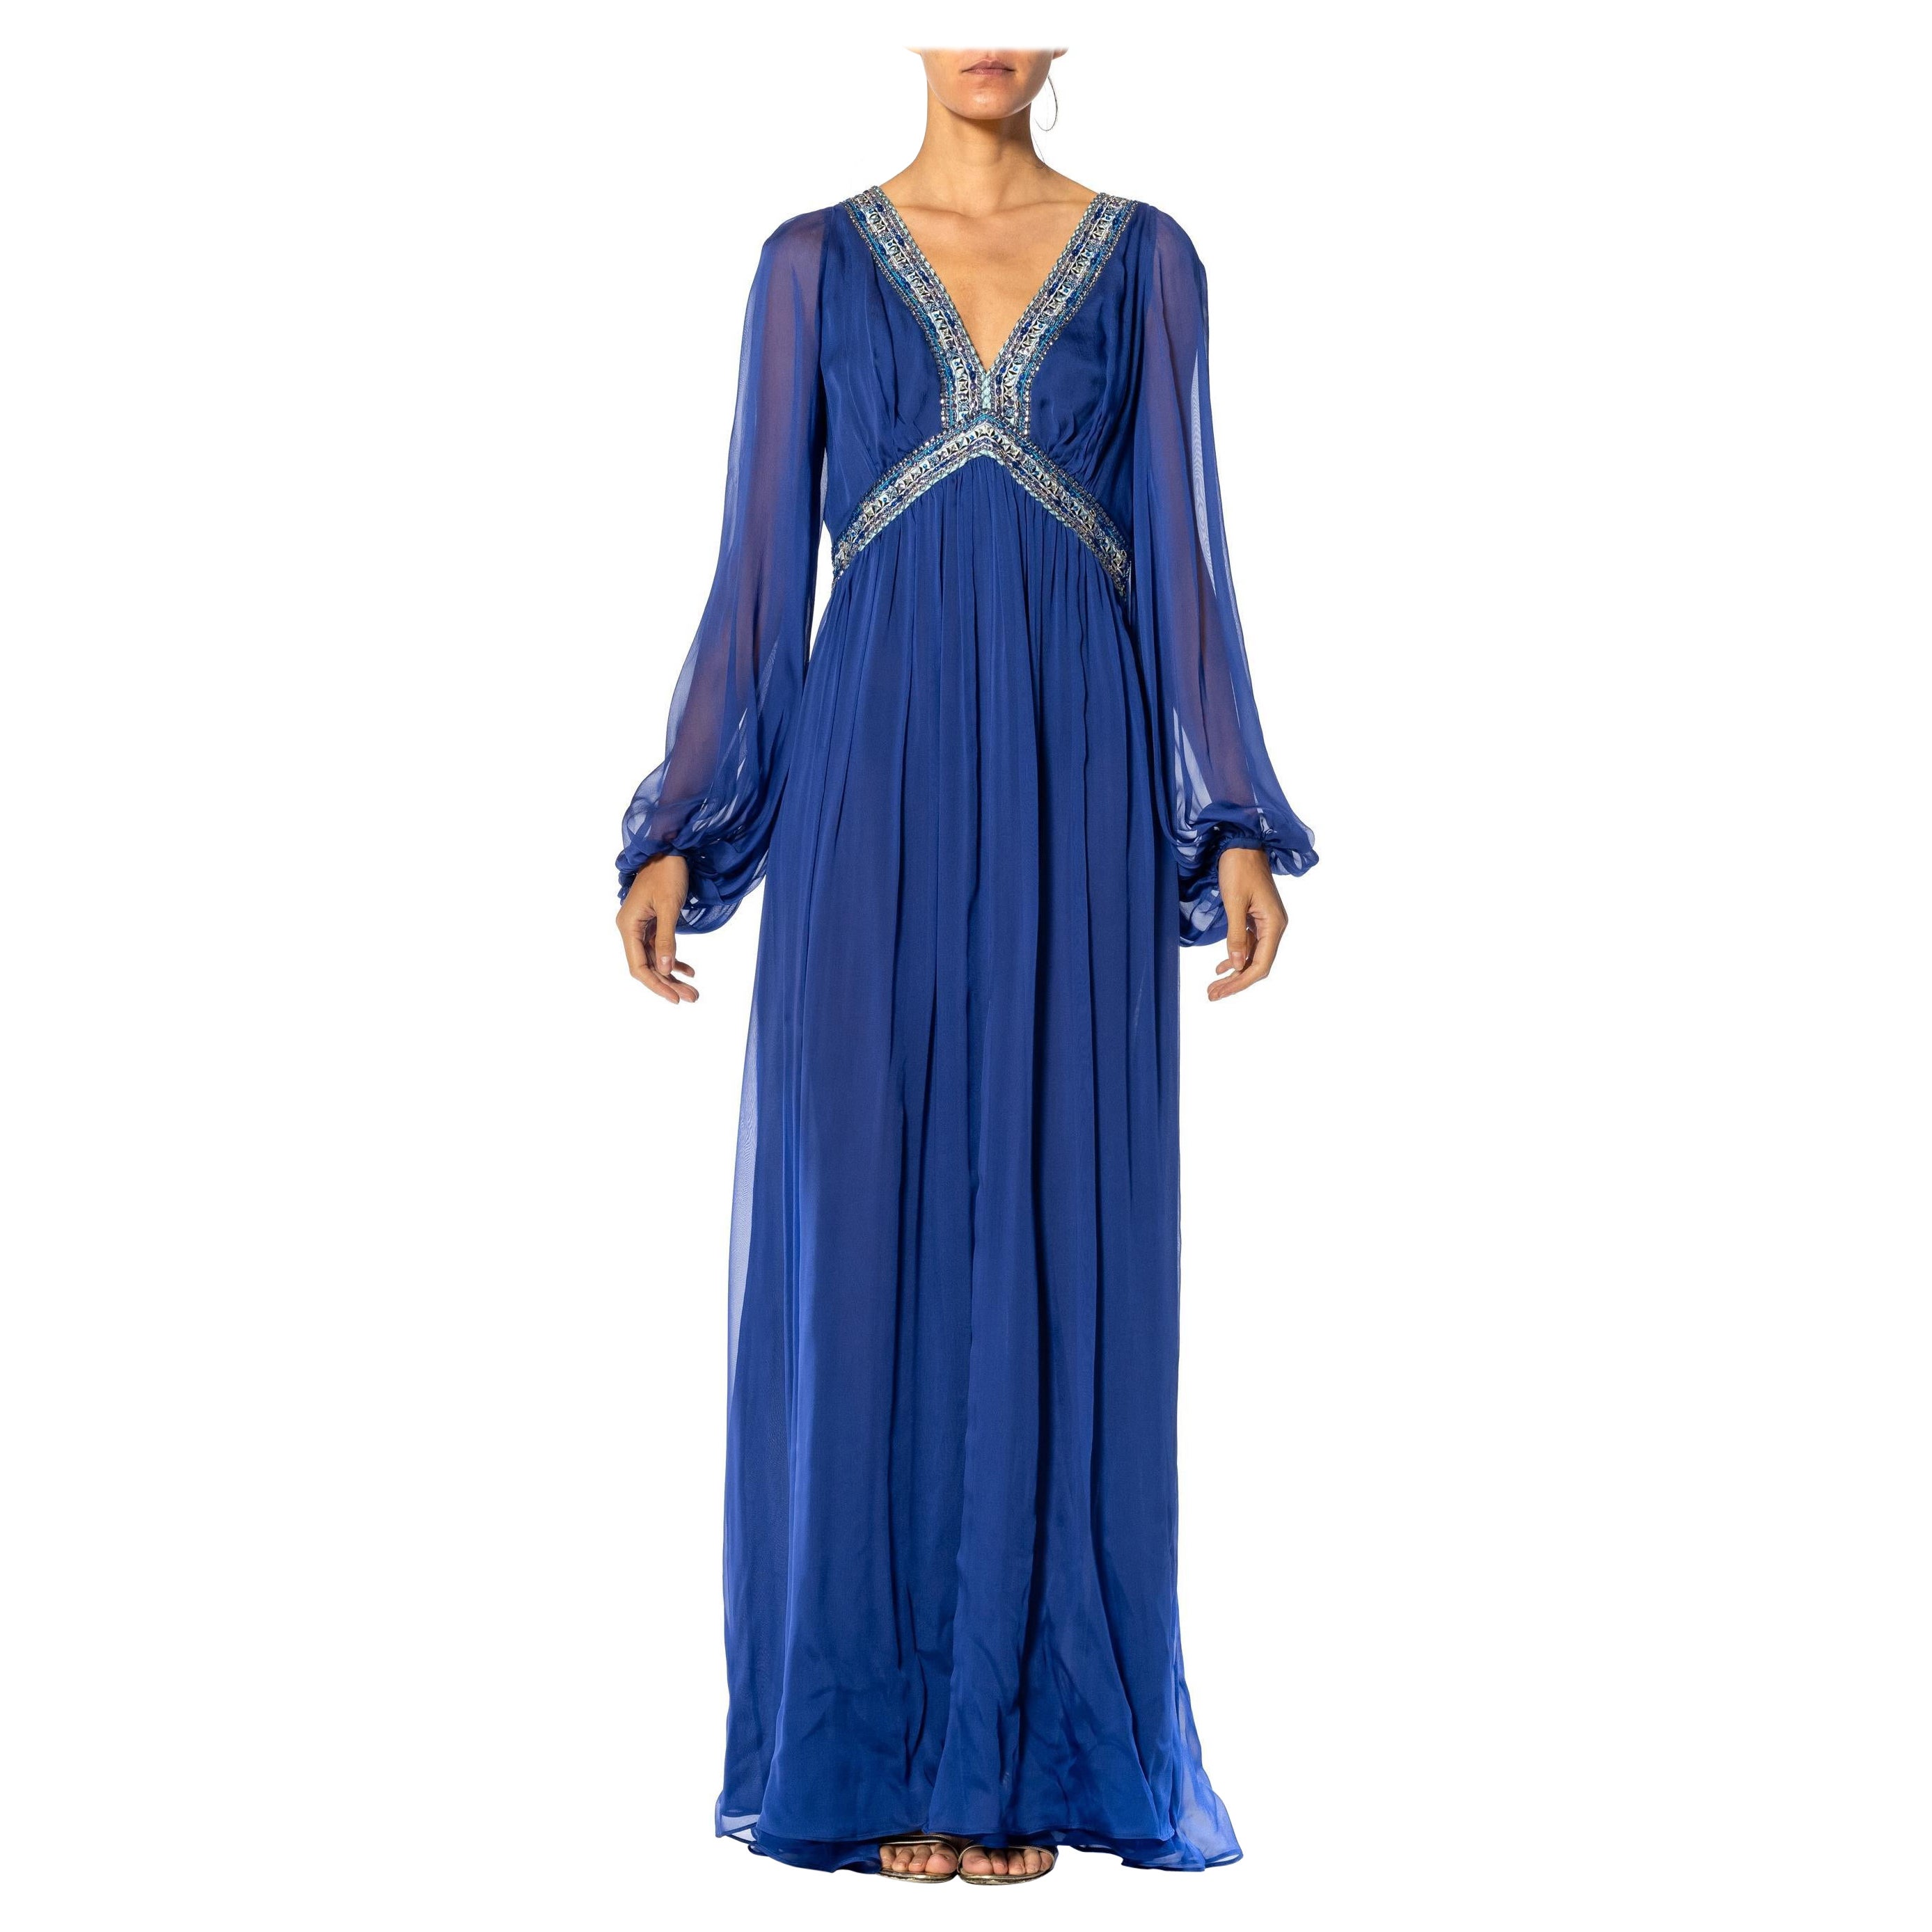 2000S EMILIO PUCCI Cobalt Blue Silk Chiffon Sleeved Gown With Beaded Print Deta For Sale